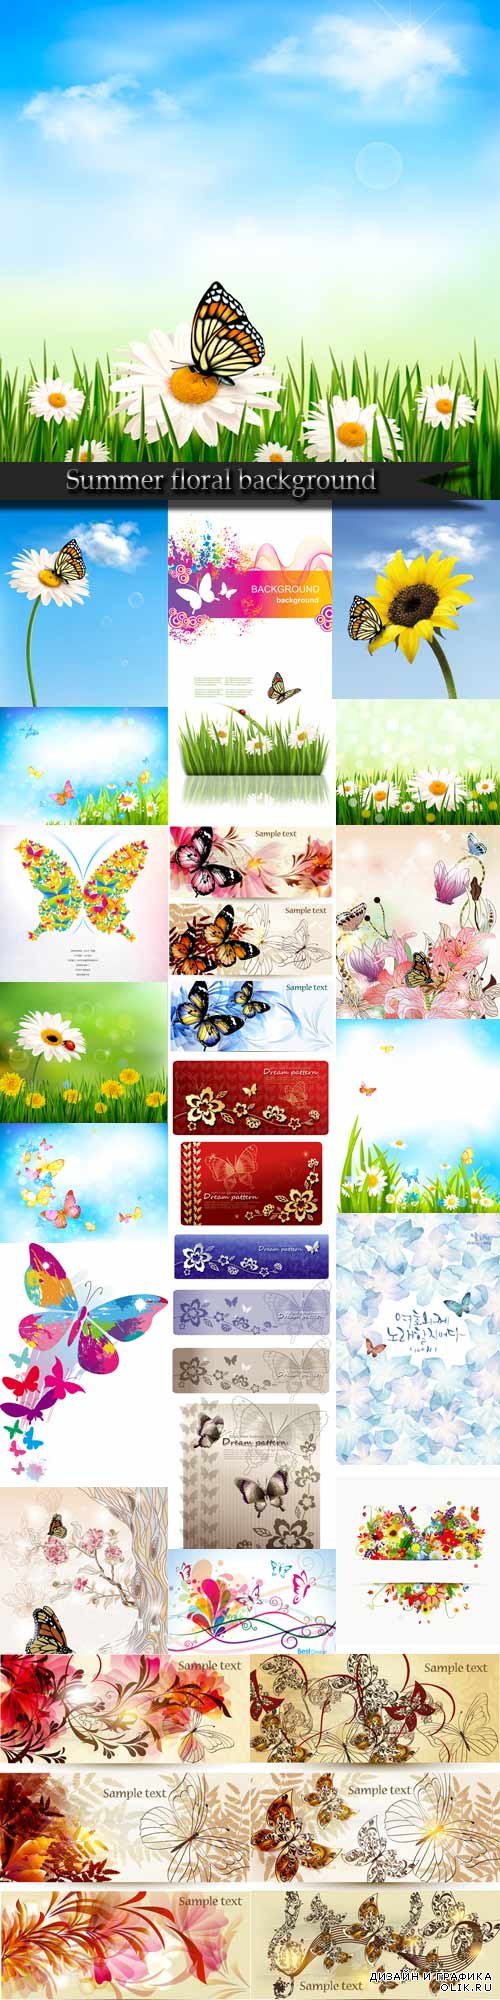 Summer floral background with butterflies